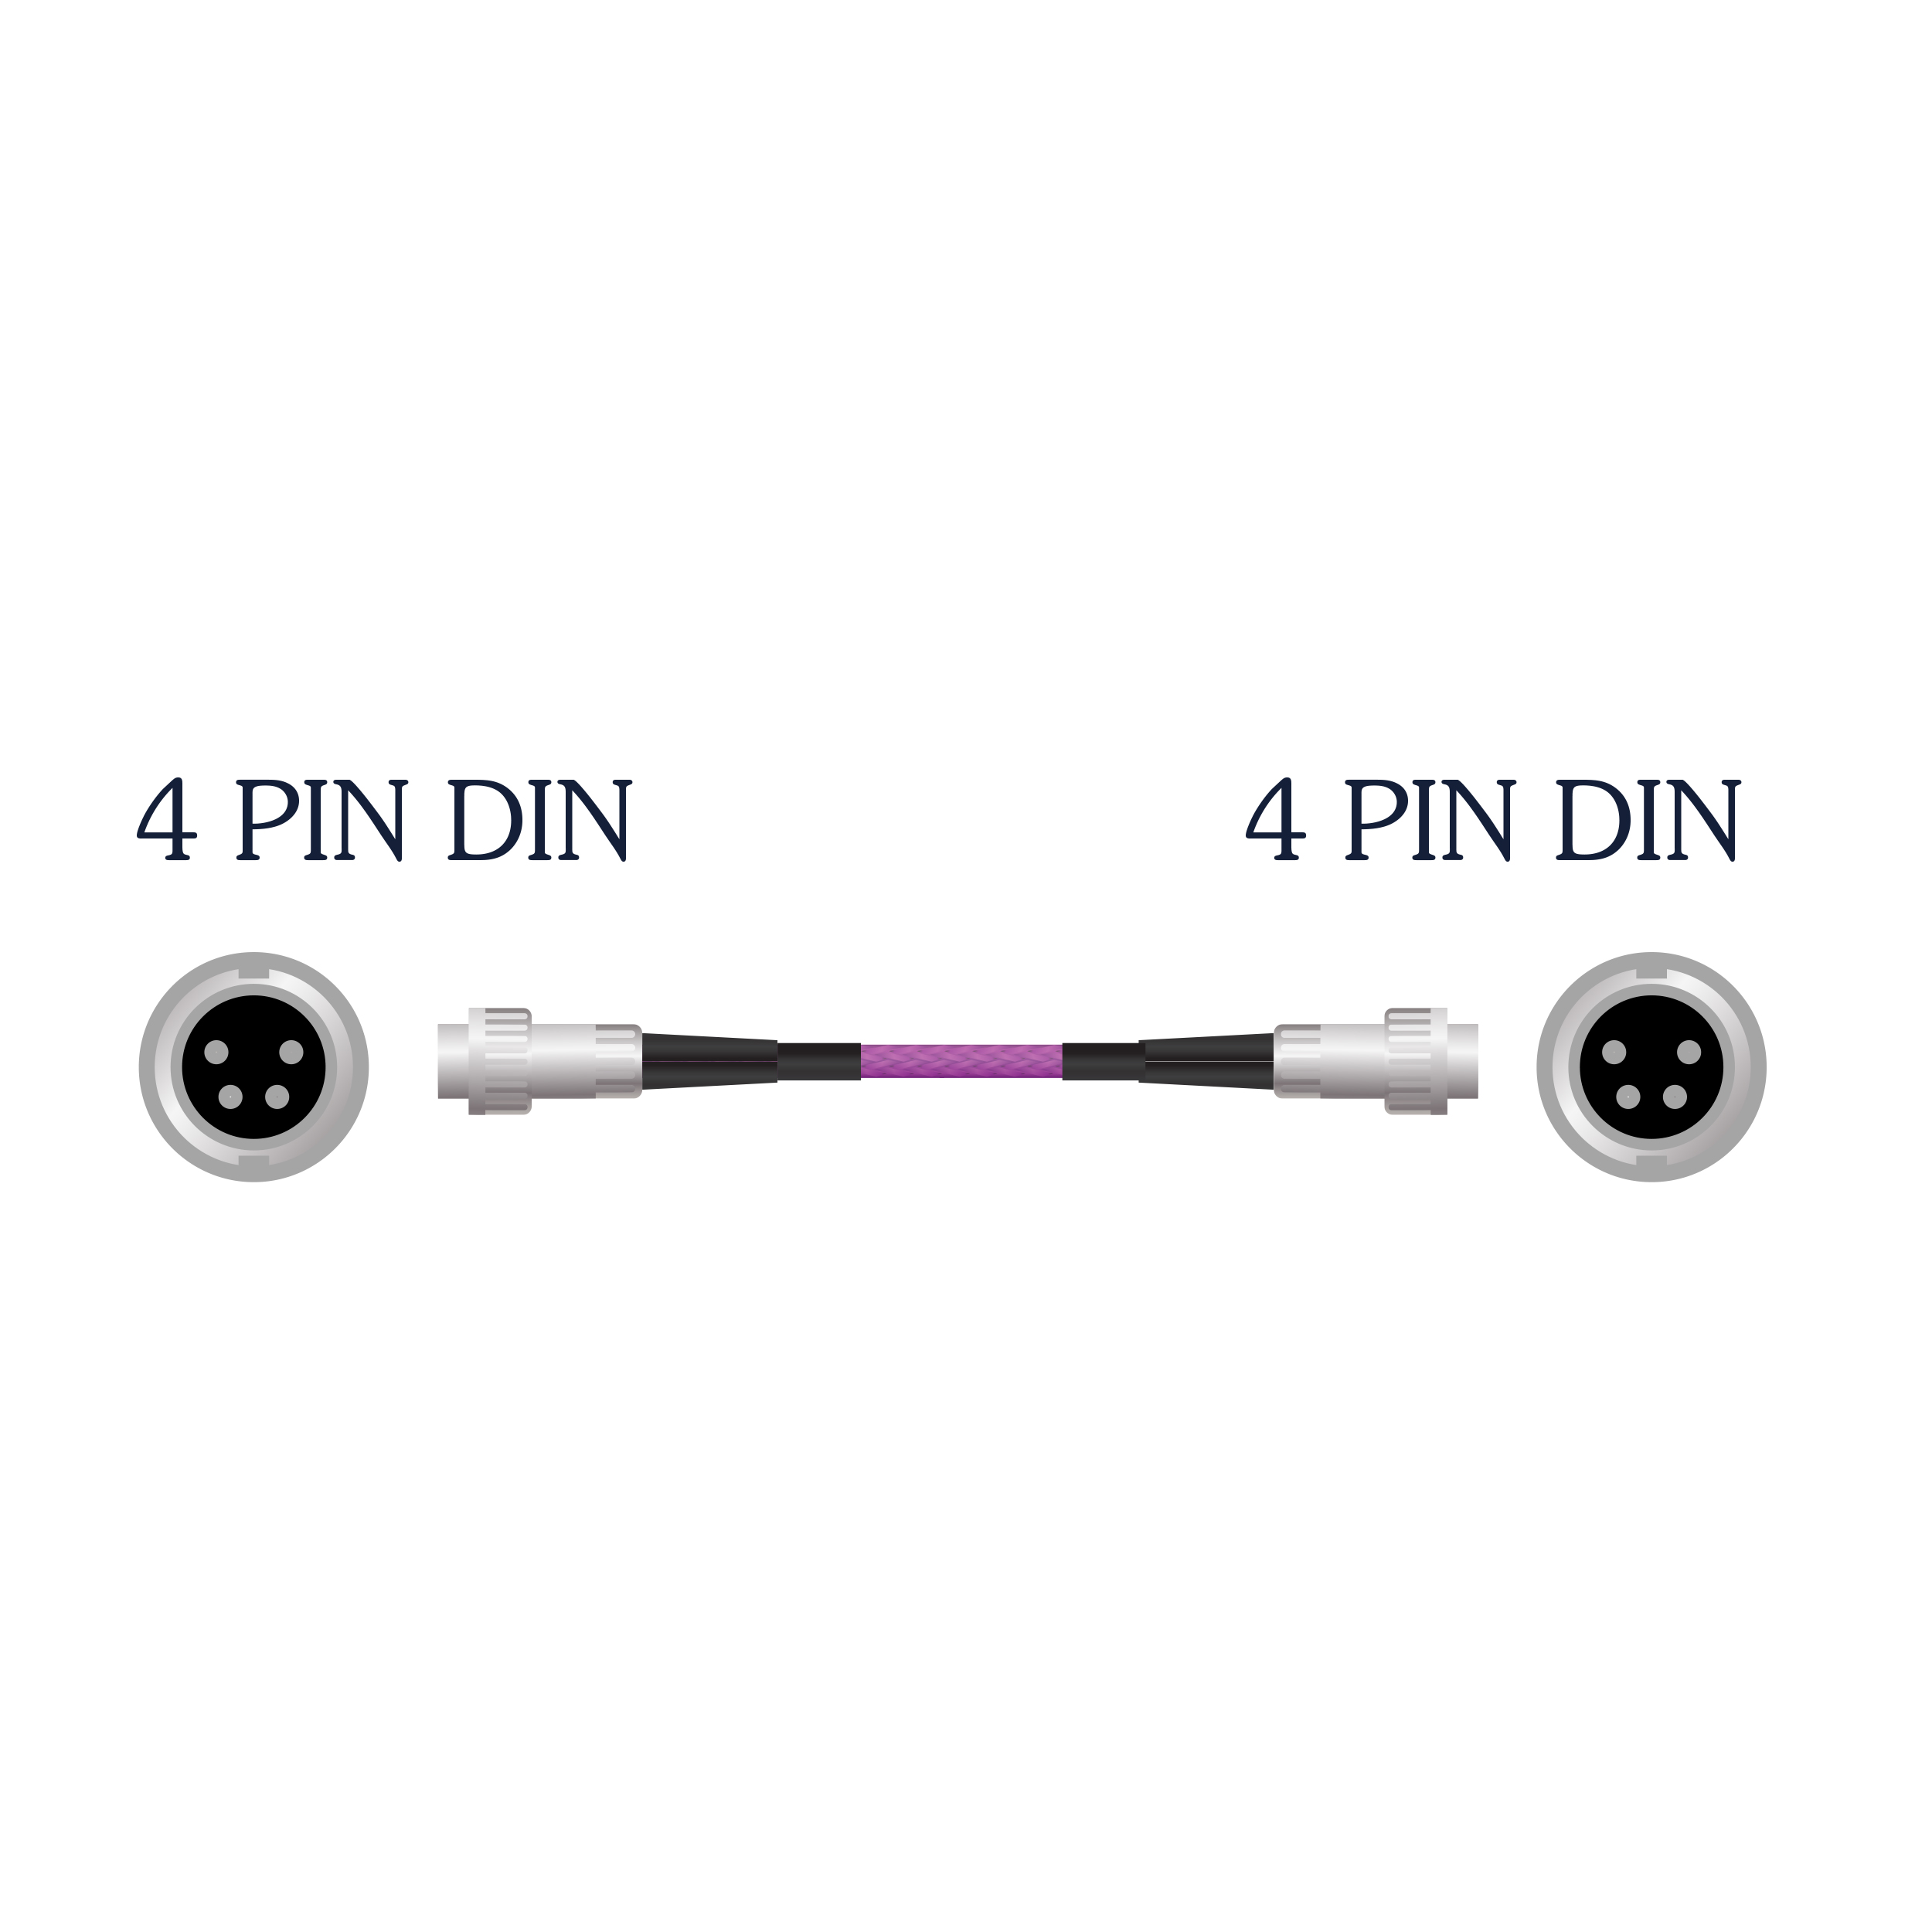 <p align="center">Frey 2 Specialty 4 Pin DIN To 4 Pin DIN Cable</p>